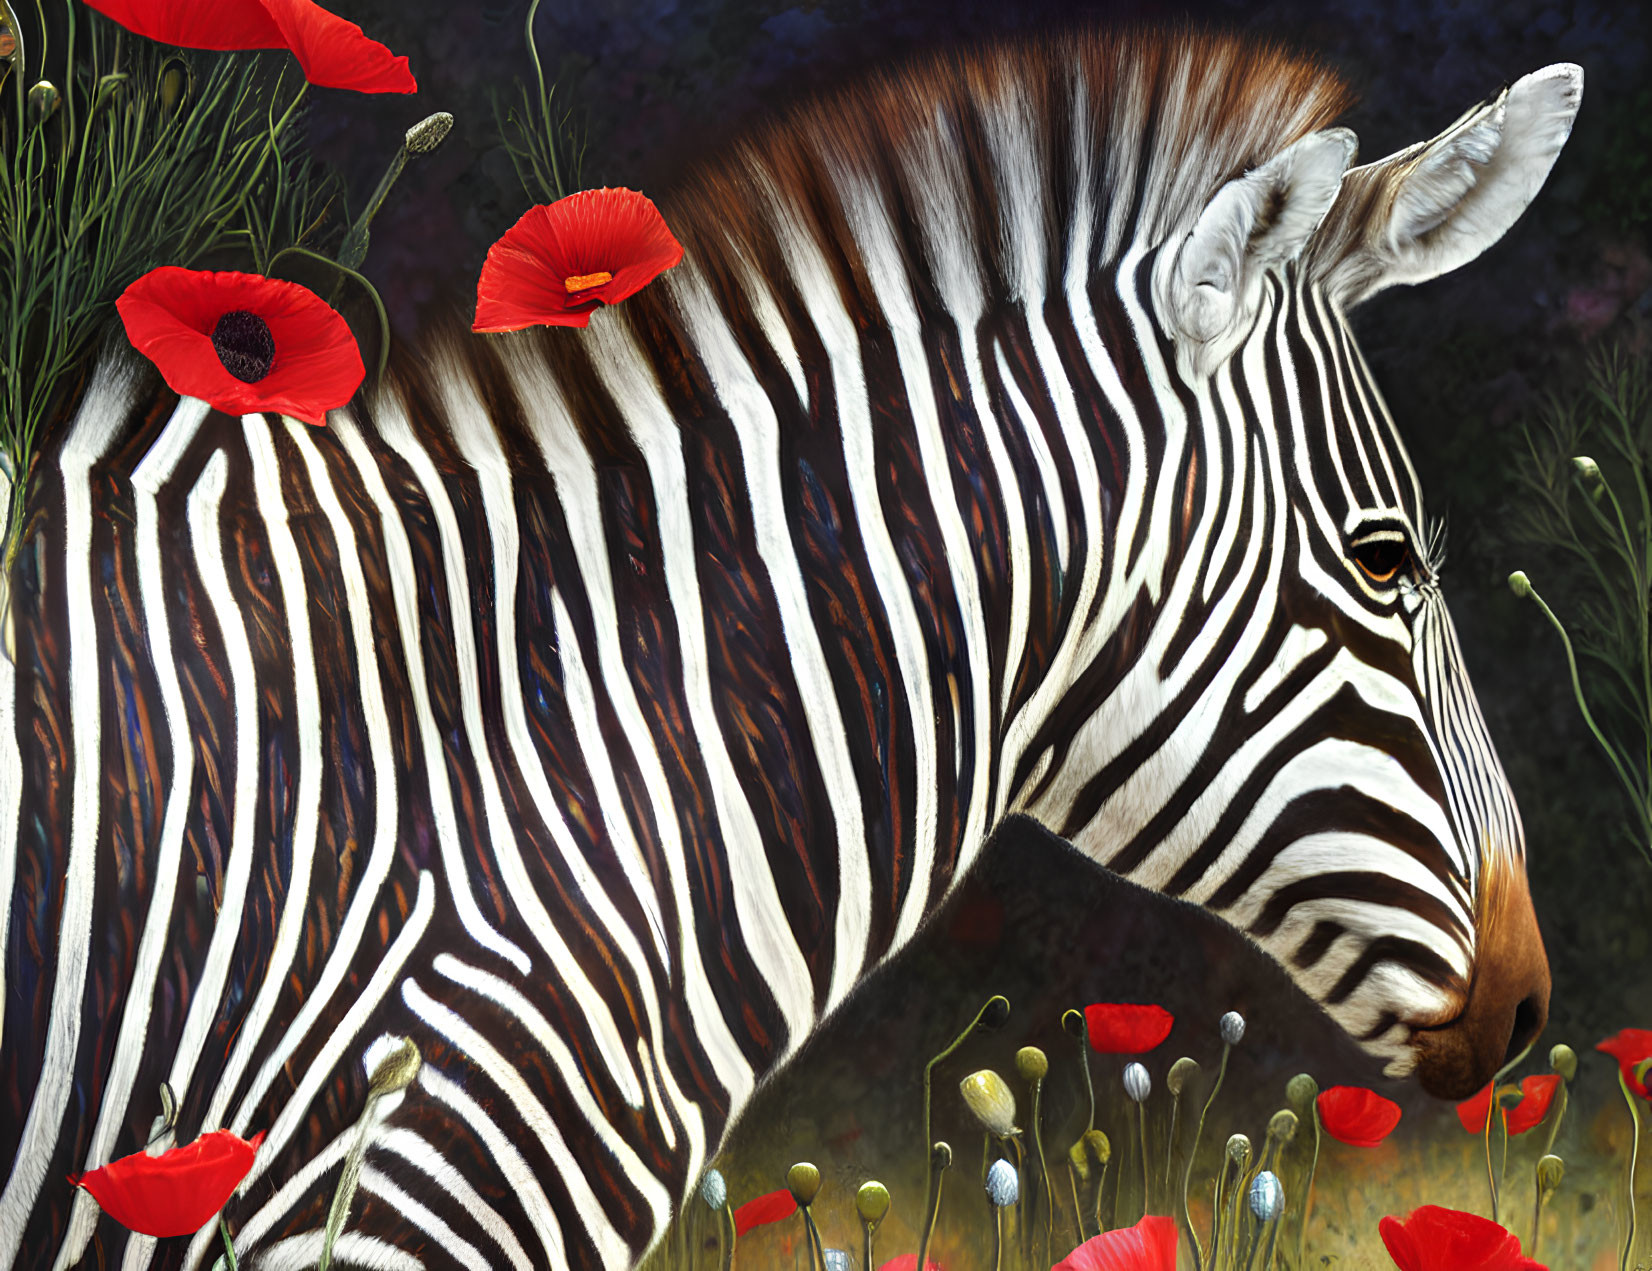 Zebra head and neck in red poppies with dark background